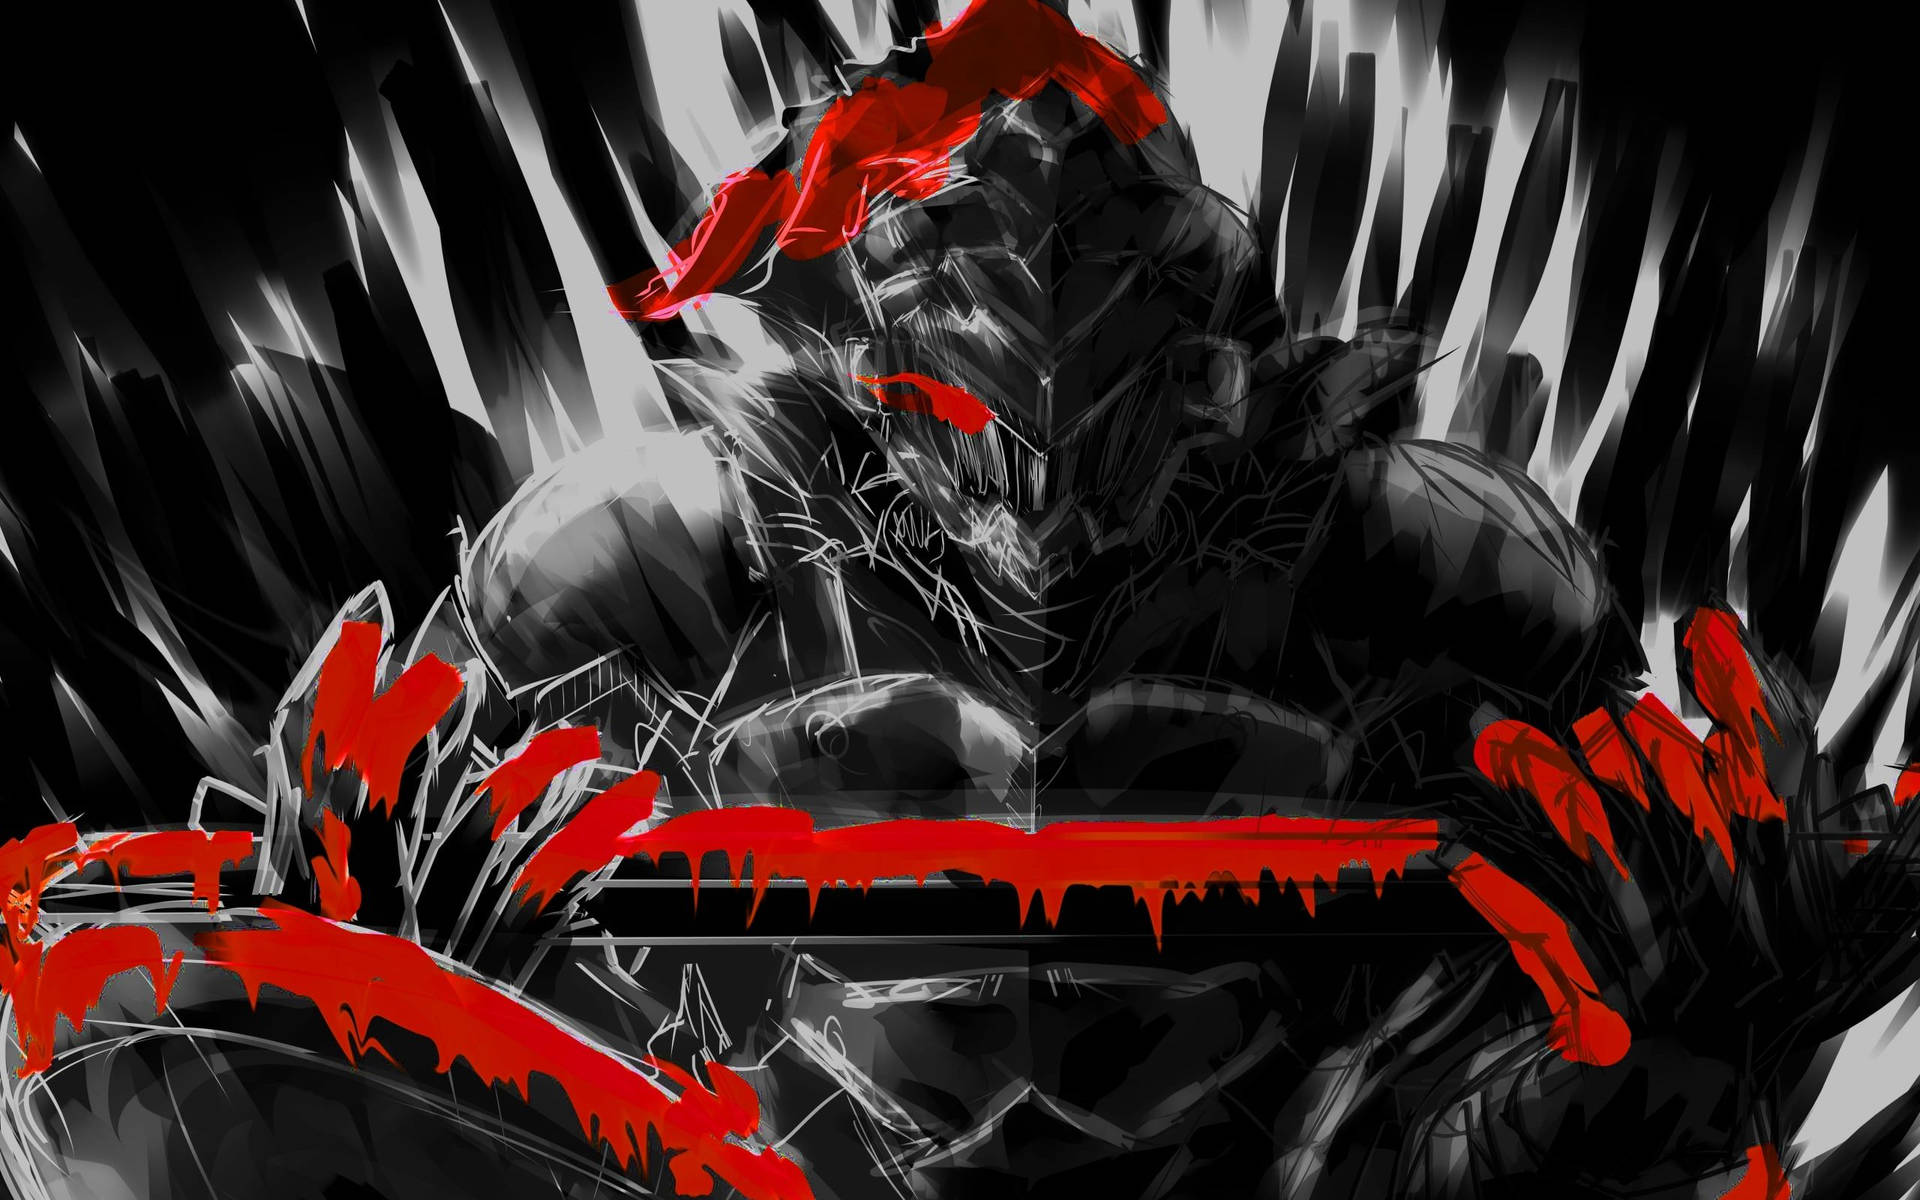 “Goblin Slayer fights for justice” Wallpaper